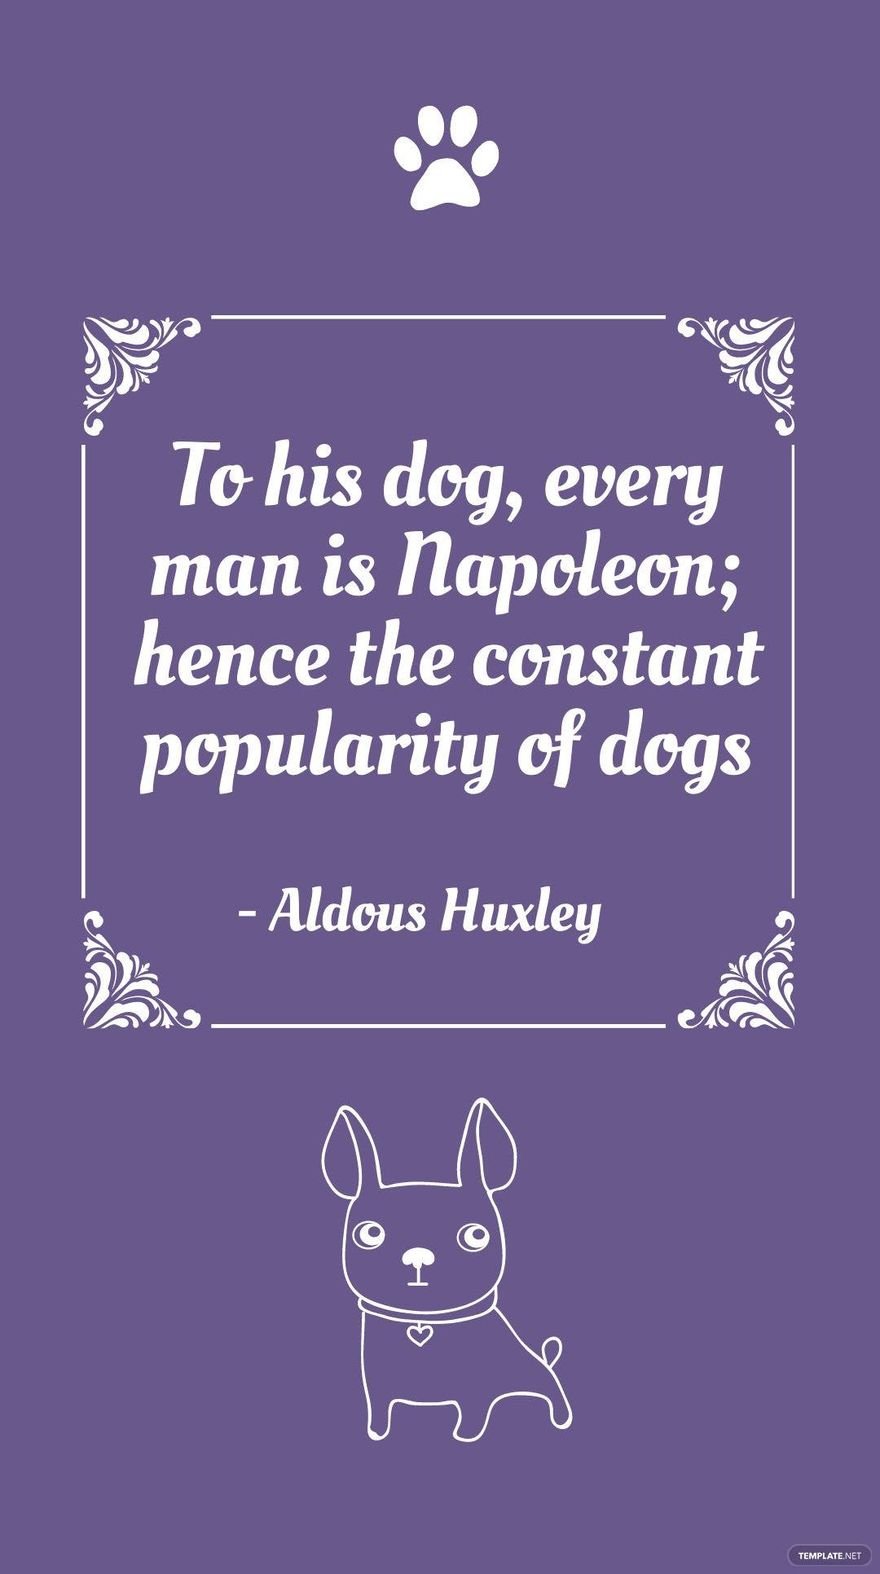 Aldous Huxley - To his dog, every man is Napoleon; hence the constant popularity of dogs in JPG